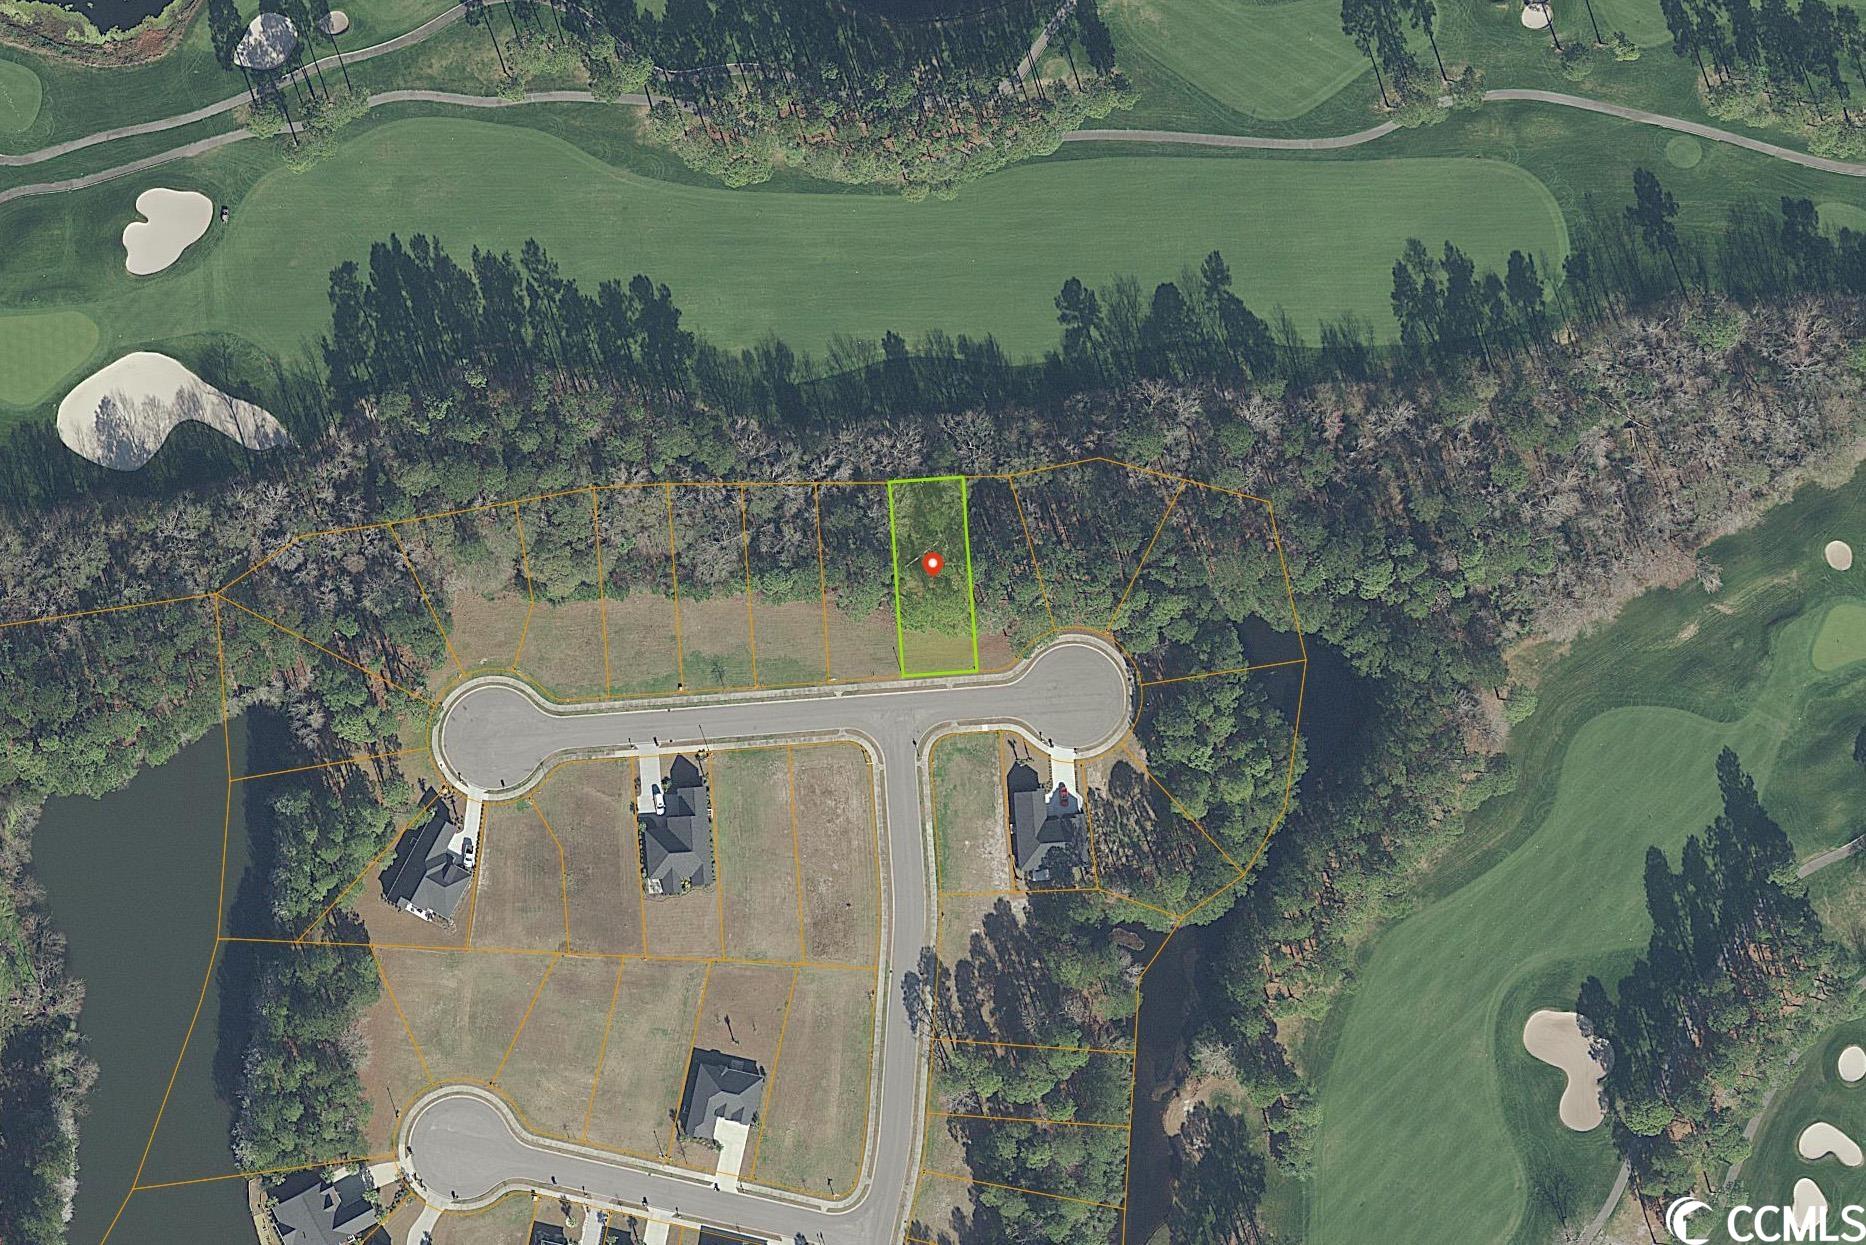 great, build ready lot available in the prestigious wild wing plantation with golf course views. bring your own builder with no time frame to build. wild wing plantation is a secluded neighborhood with upscale homes and resort style amenities that include: 18 hole golf course, private pool complex with three swimming pools, splash zone, and water slide, community center with meeting space, lighted tennis courts, private owner's club with fitness center, 180 acres of freshwater lakes with nearly 14 miles of shoreline, private community day docks with boat ramp and parking, on-site boat and rv storage, kids playground area, picnic area, basketball court and natural protected areas. wild wing plantation is located in the carolina forest school district. close to the beach and all that myrtle beach has to offer.